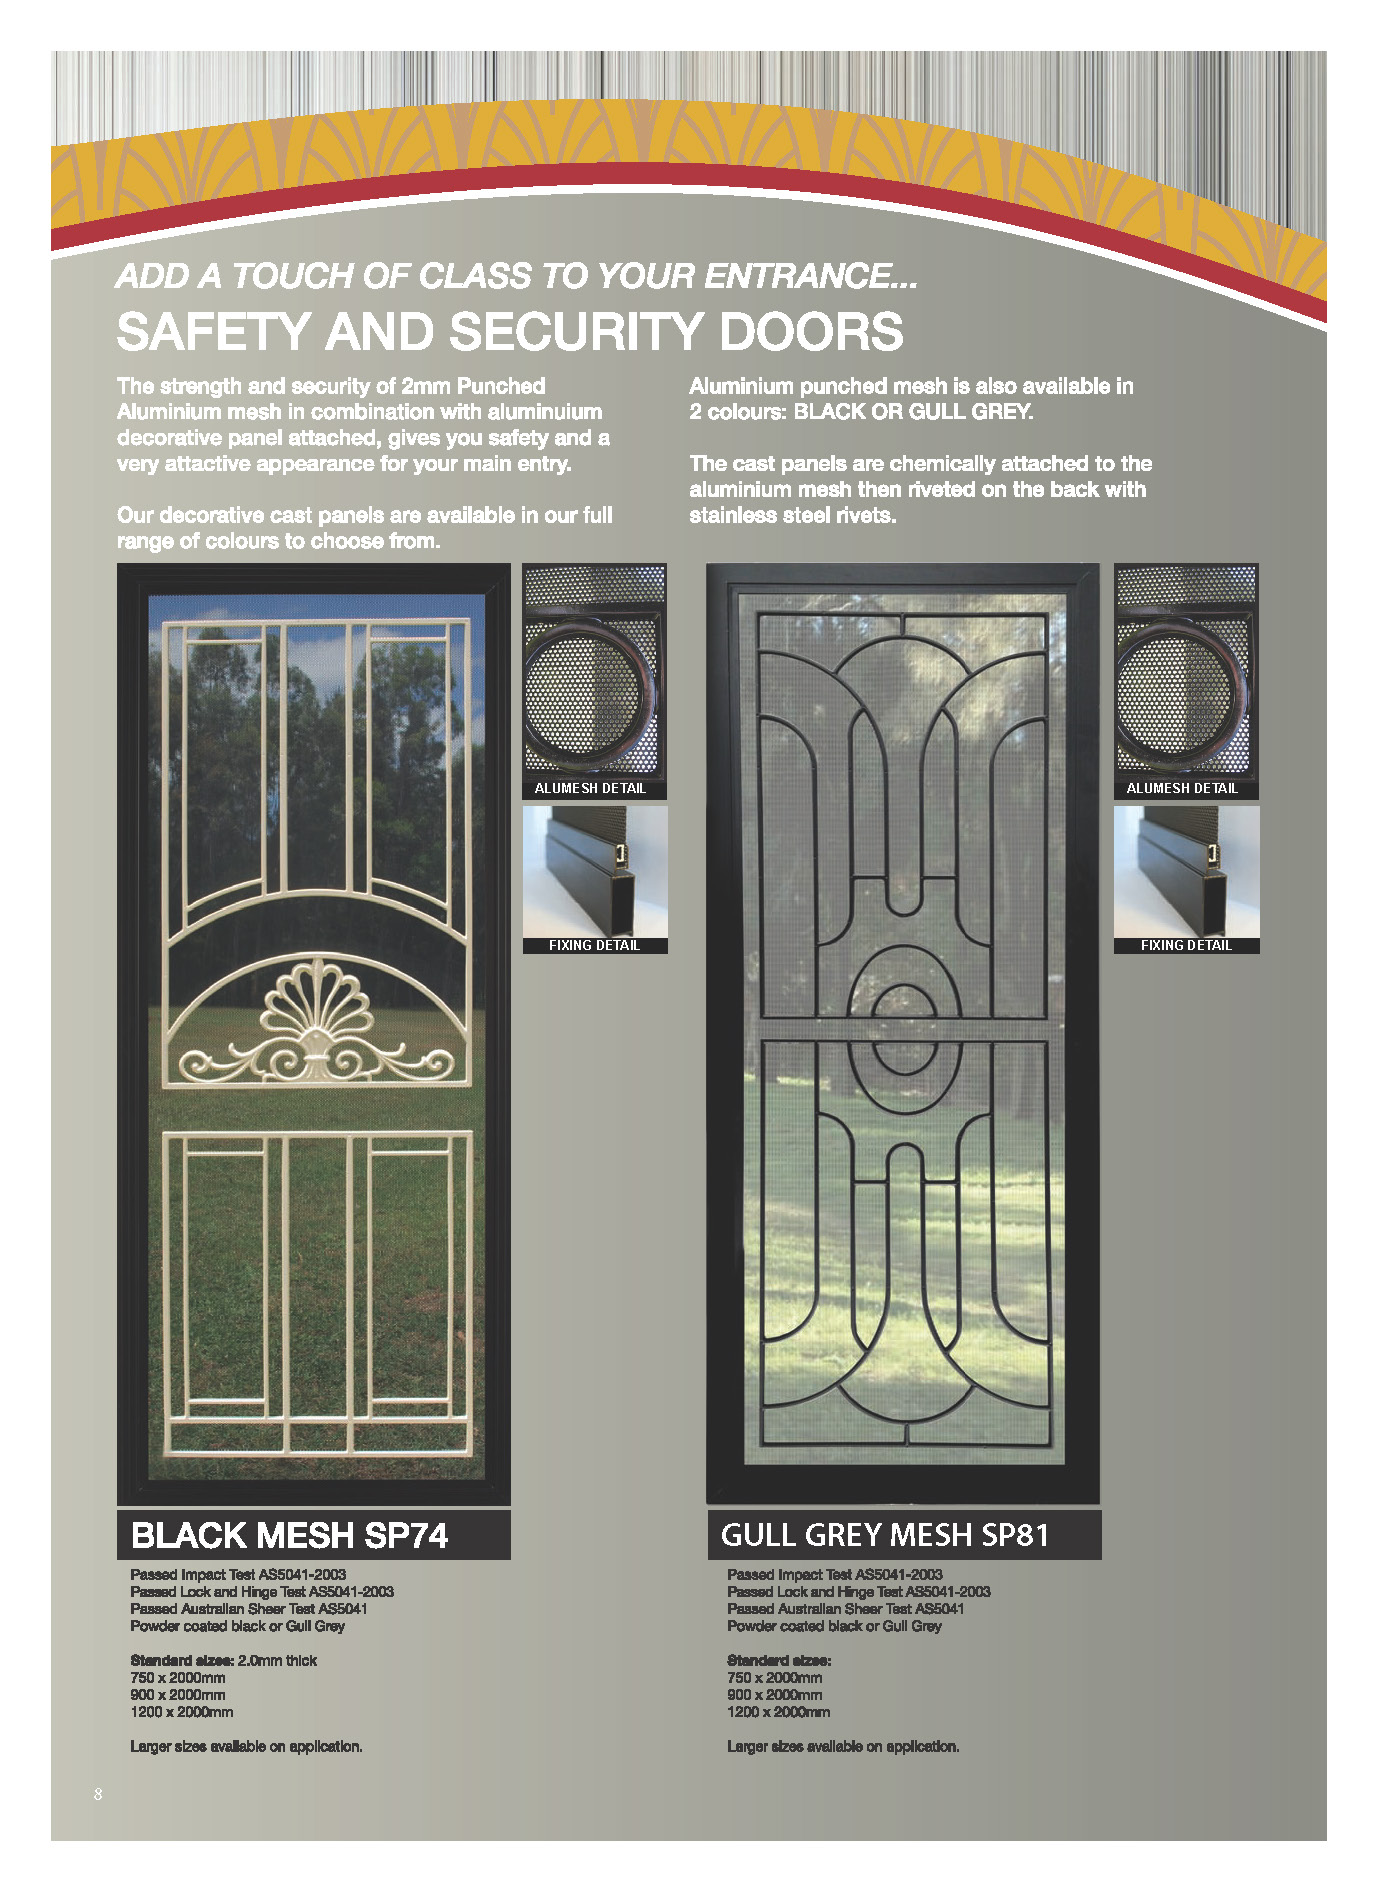 safety and security doors featuring black mesh and dull grey mesh